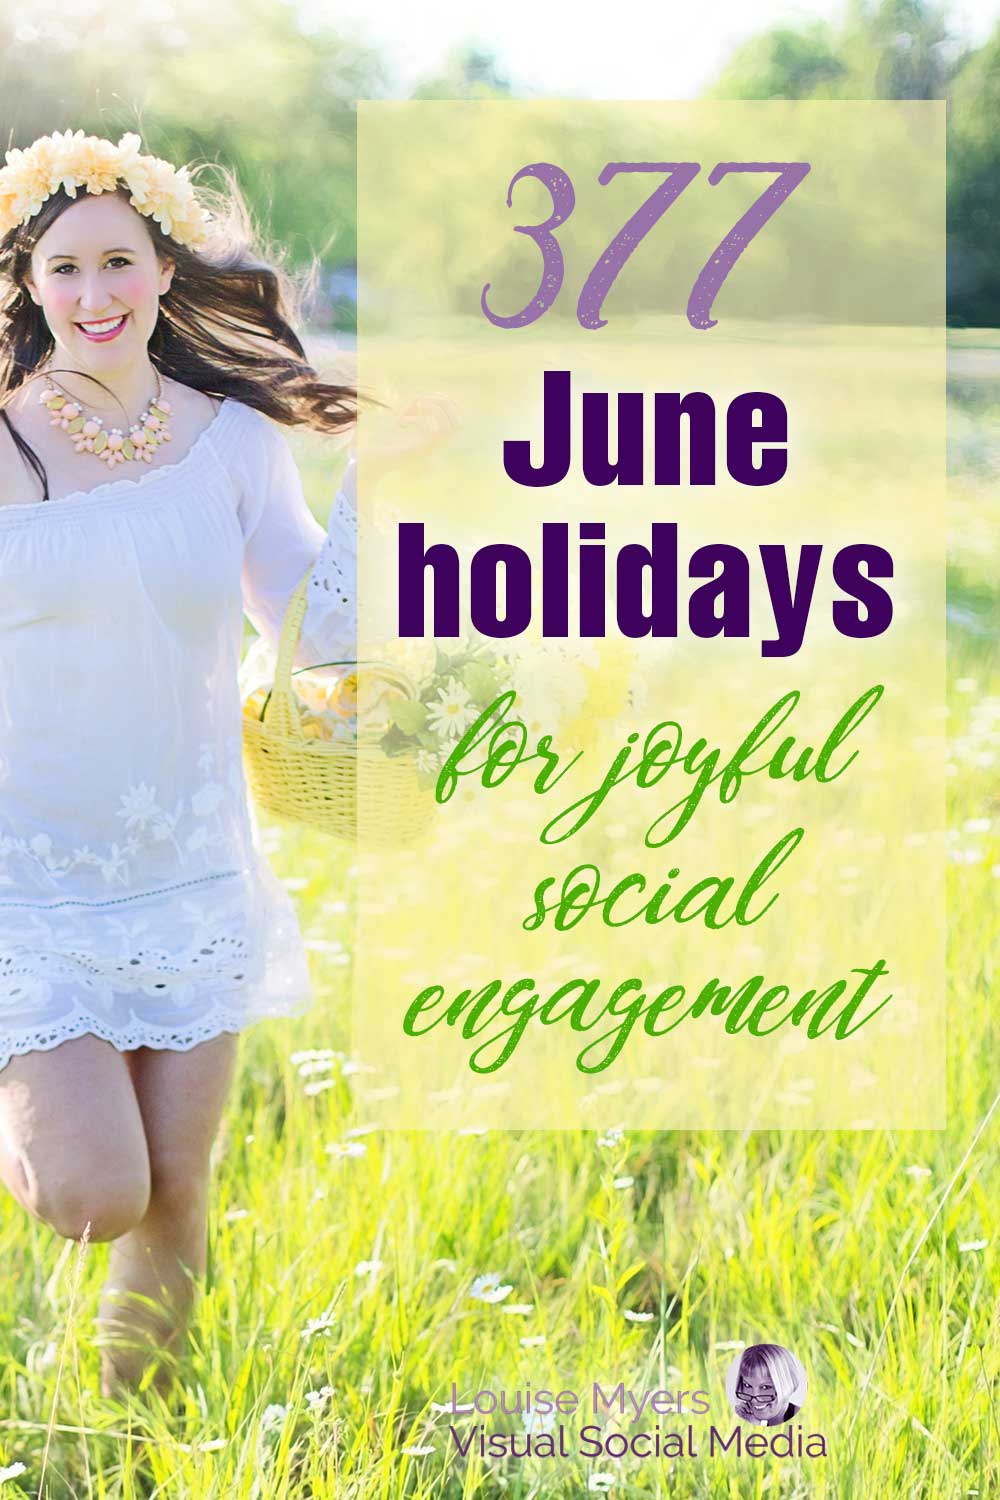 woman with flower crown running through daisies has text 377 june holidays for joyful social media engagement.